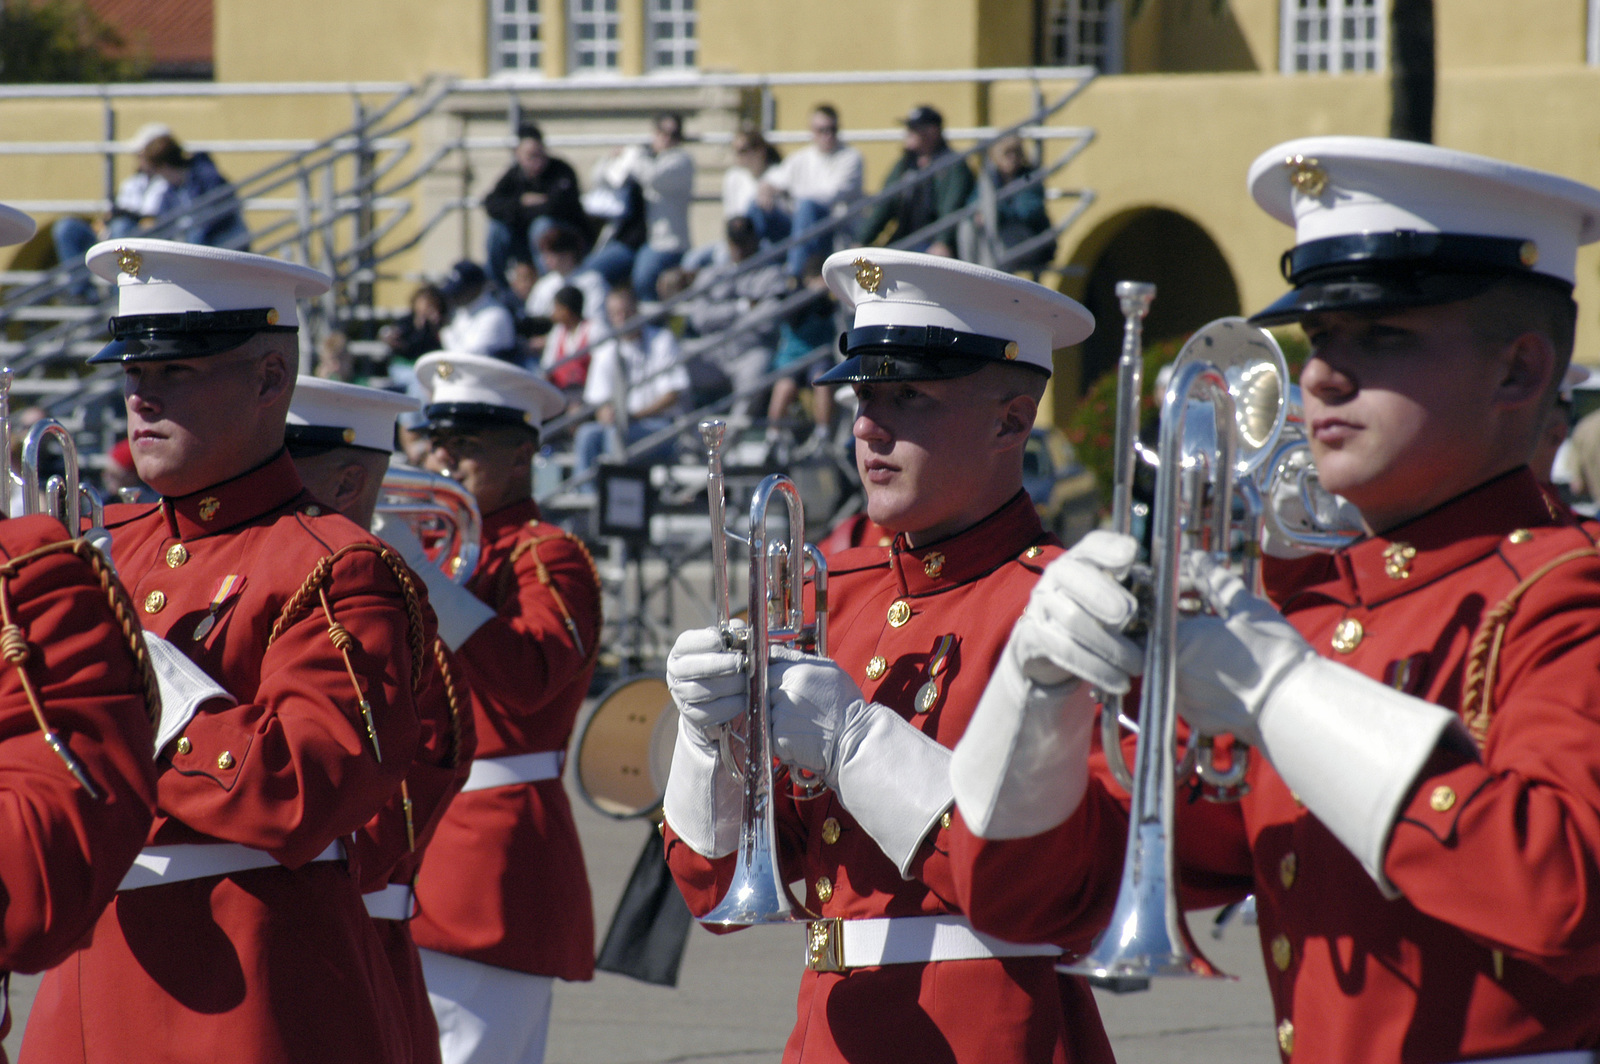 The US Marine Corps (USMC) Drum and Bugle Corps performs in from of